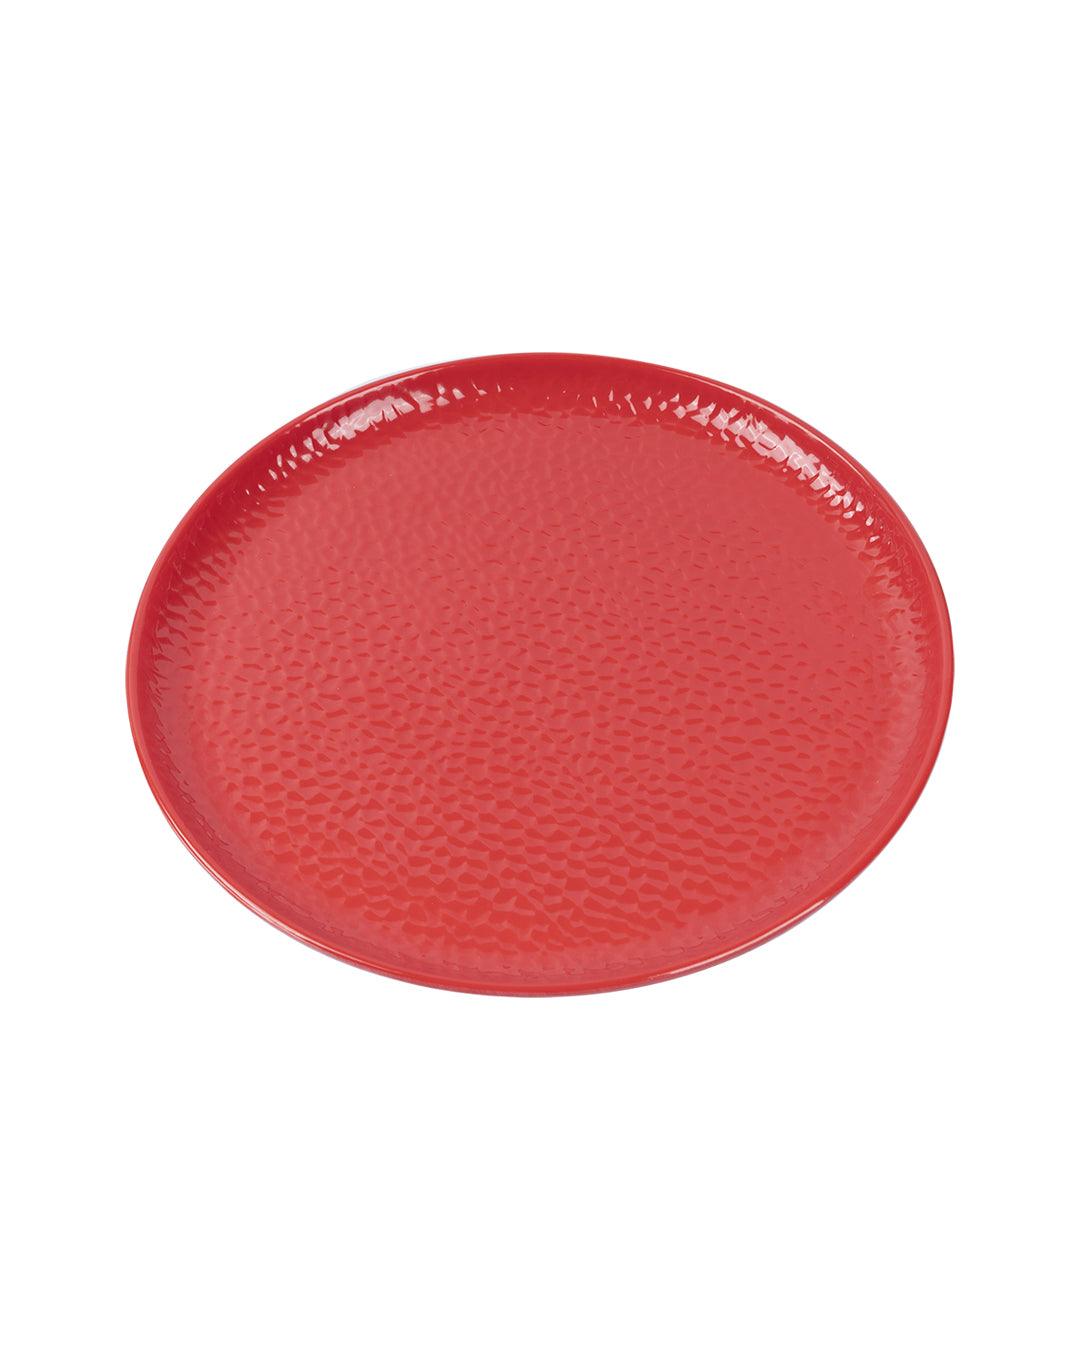 Market 99 Hammered Melamine Tableware Red Glossy Finish Quarter Plates for Dining Table (Set Of 6, Red) - MARKET 99